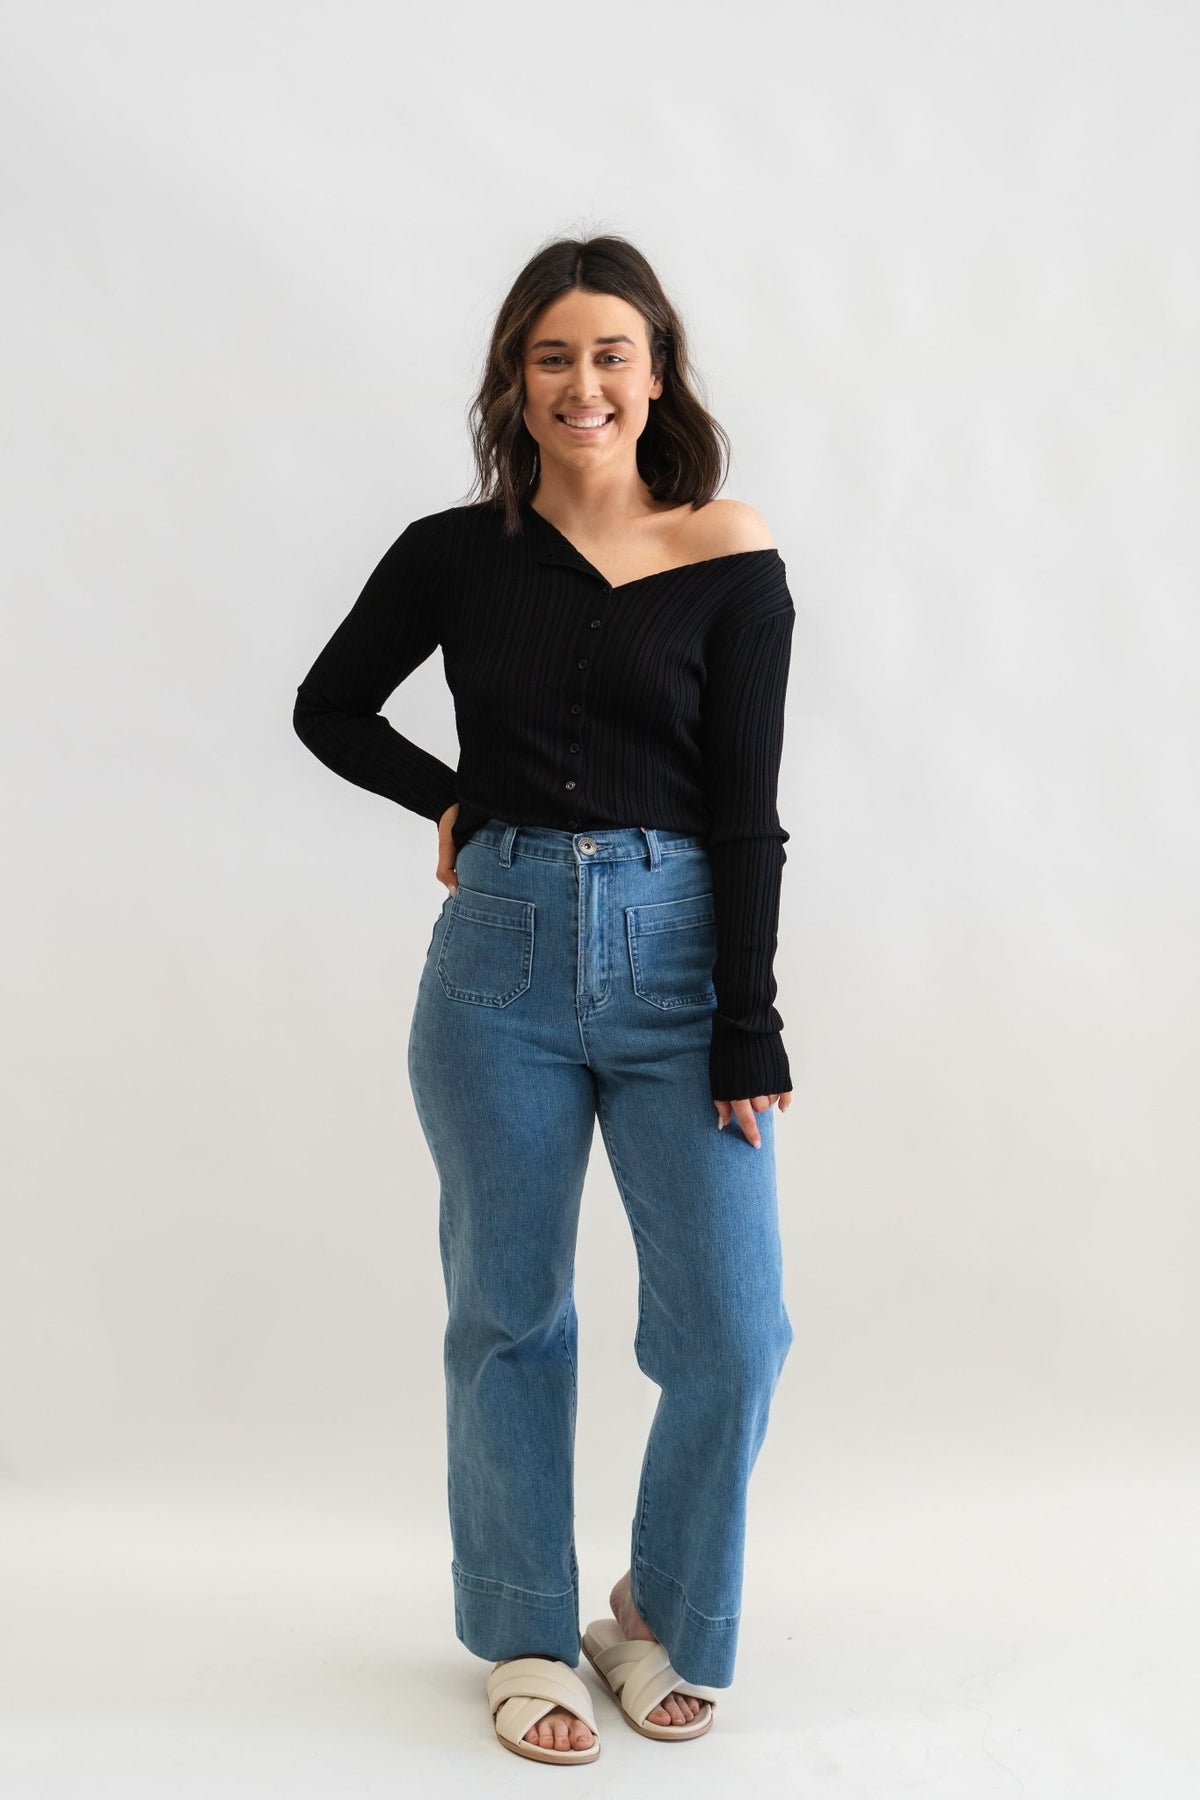 ELOISE TOP - SUNDAY BEST TRADING CO